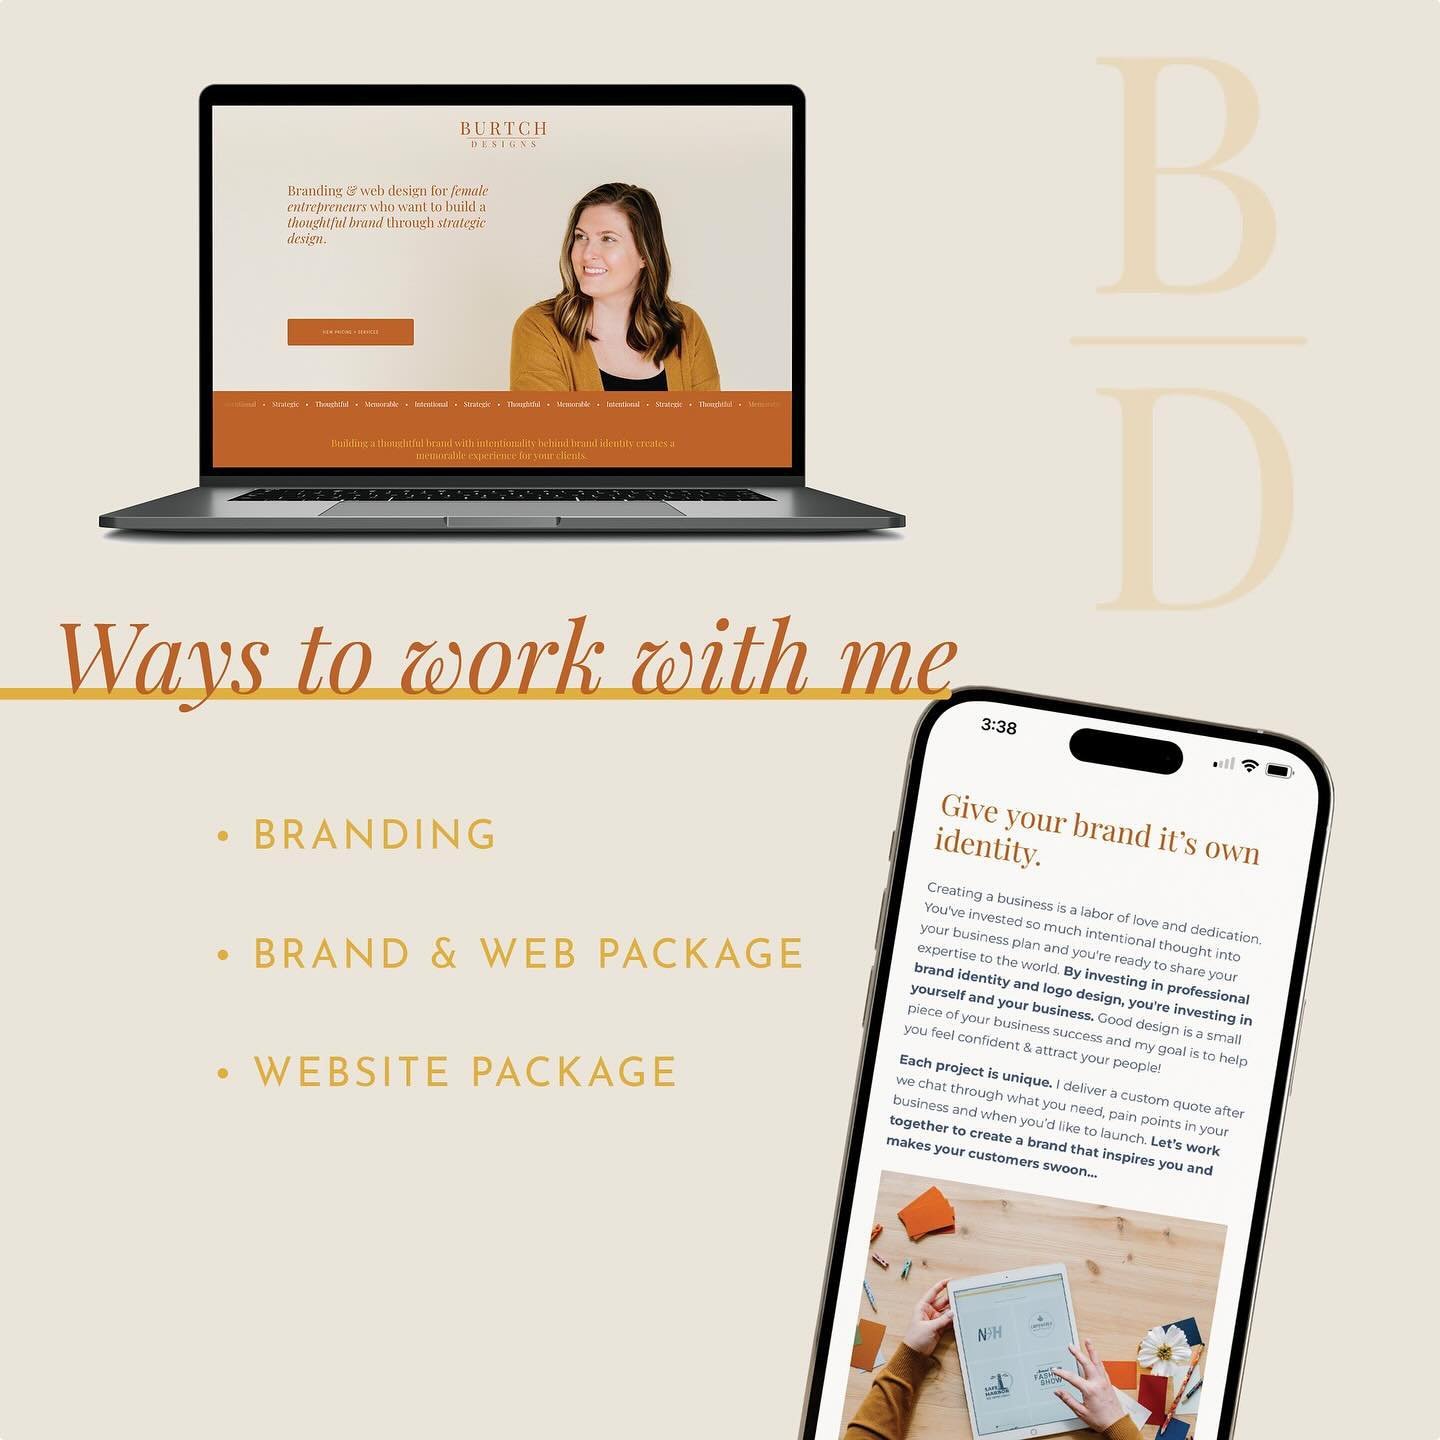 Wondering how we can work together this year? Here are three different packages I offer - all are custom to your needs, goals and business.⁠
⁠
✨️ Simply Branding: Silver Birch⁠
This is a full-service development into your brand deliverables to help y